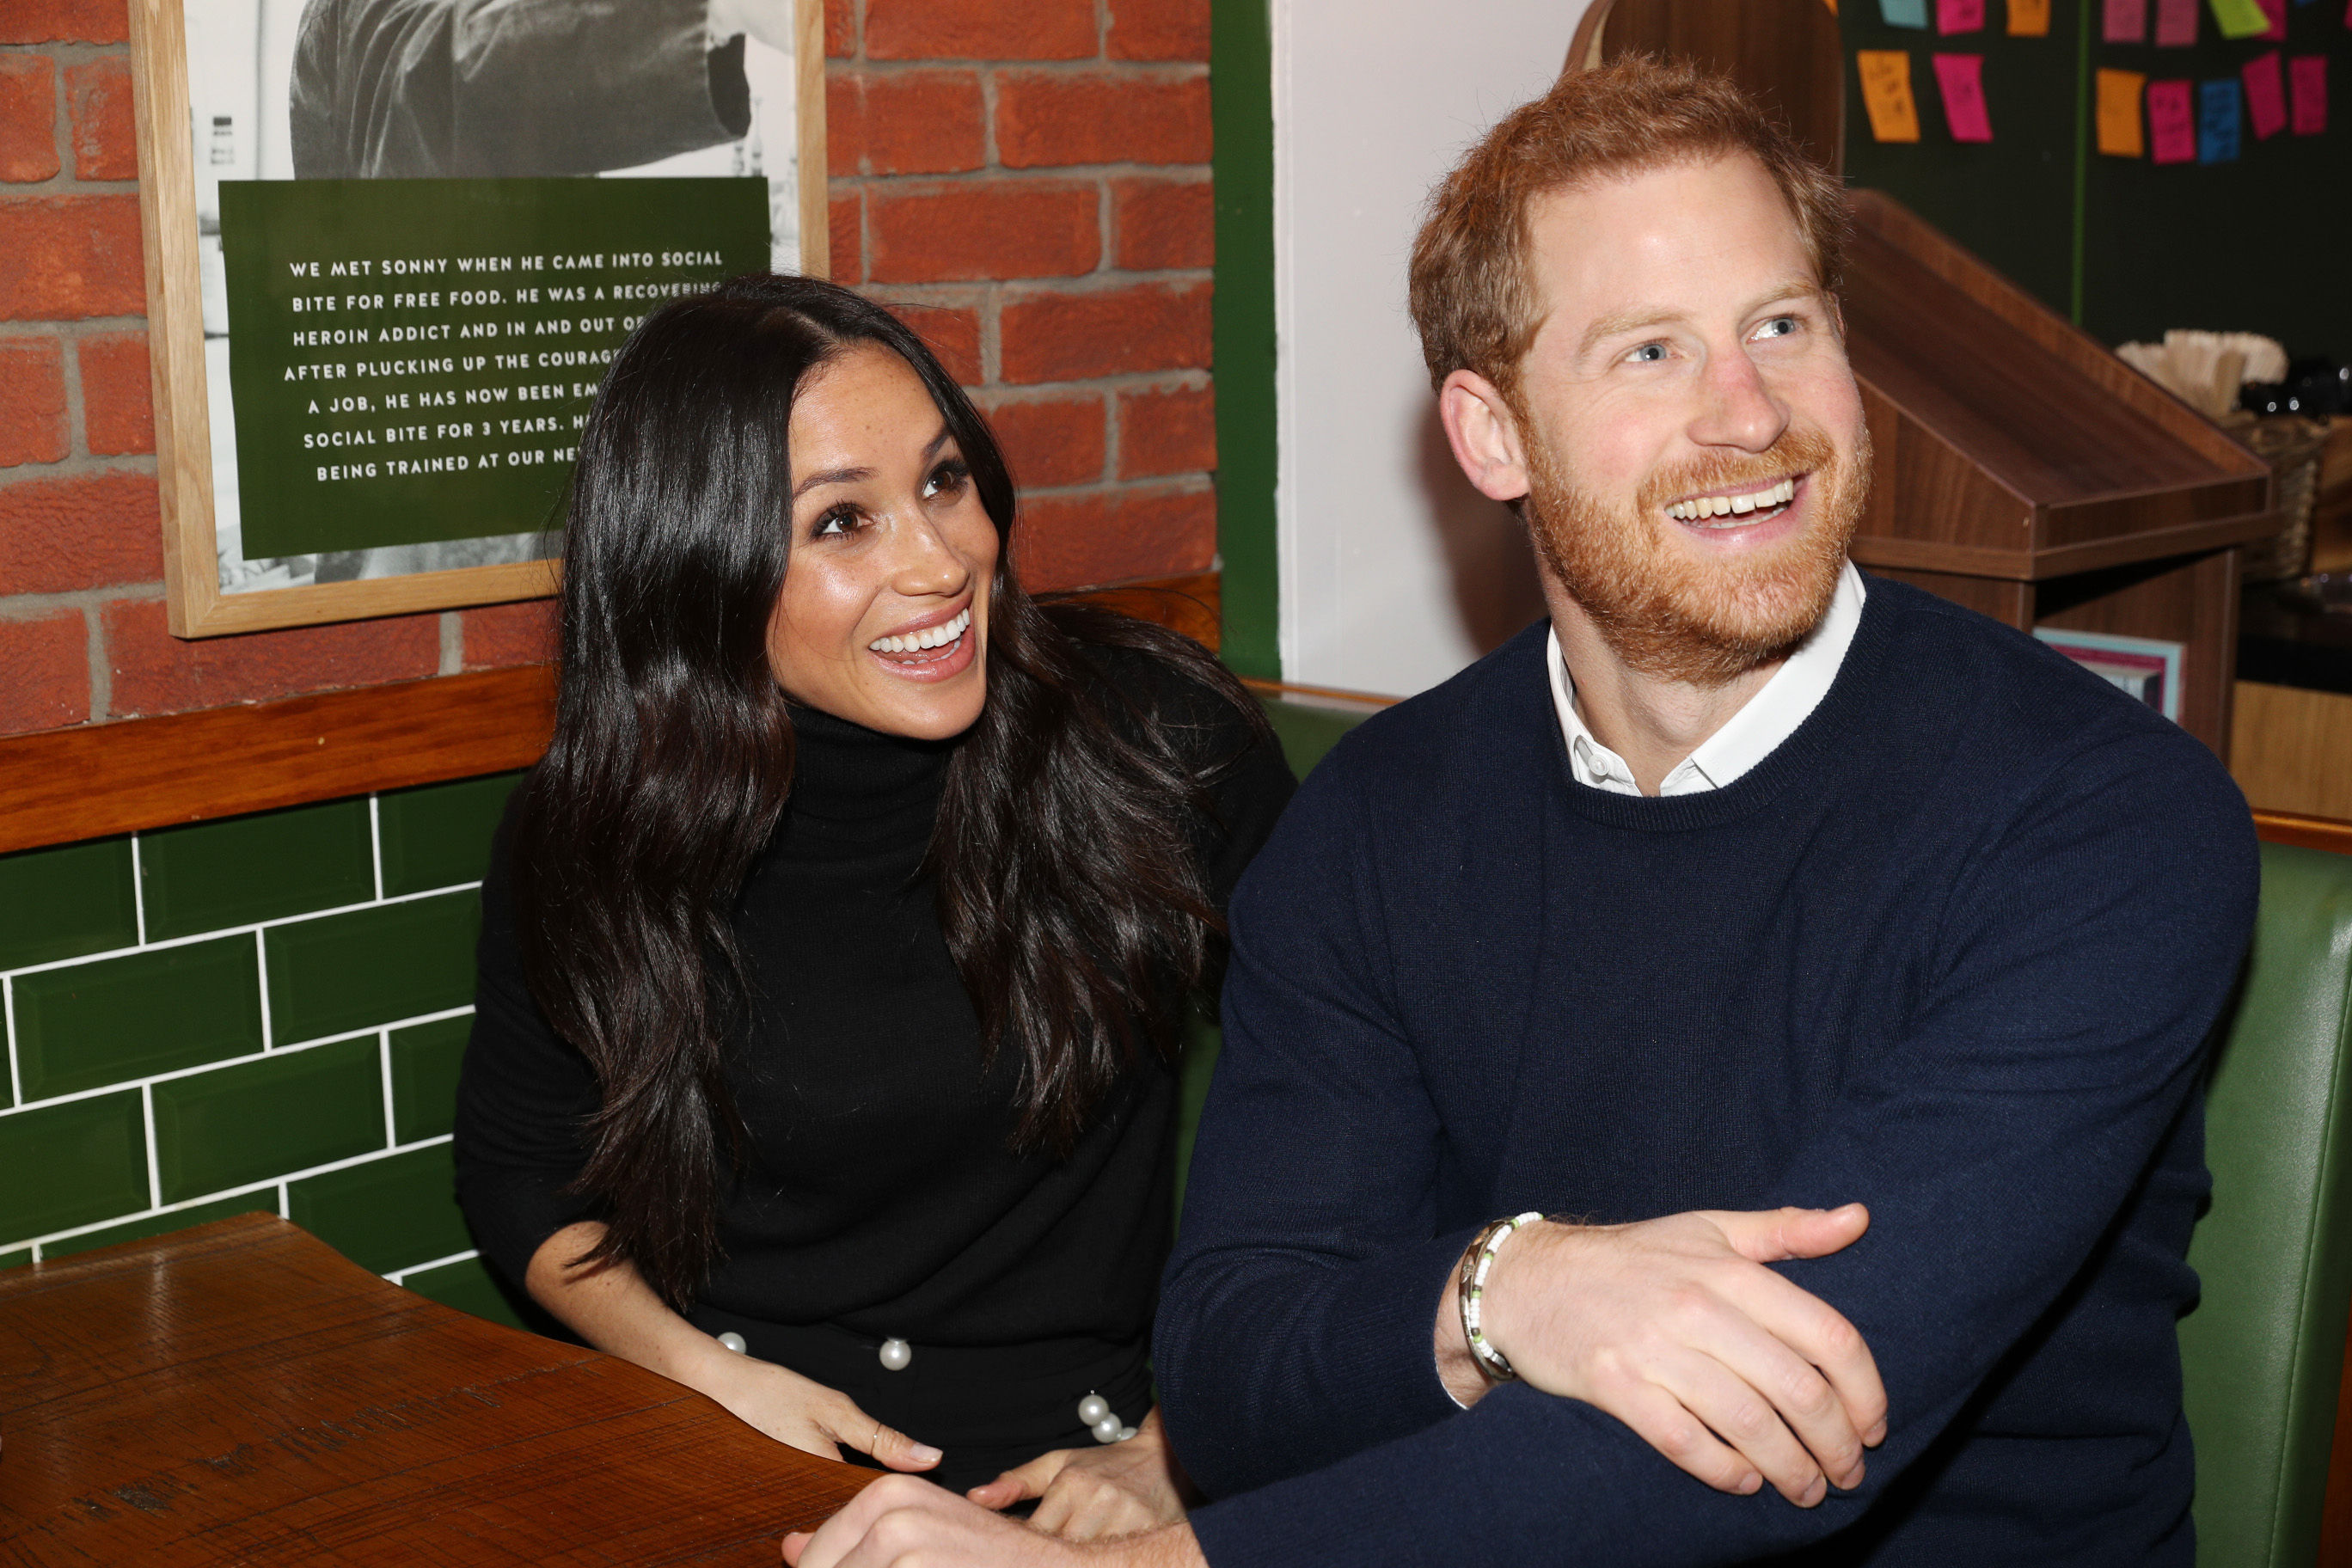 Prince Harry and Meghan Markle during their visit Social Bite on February 13, 2018 in Edinburgh, Scotland. (WPA Pool—Getty Images)